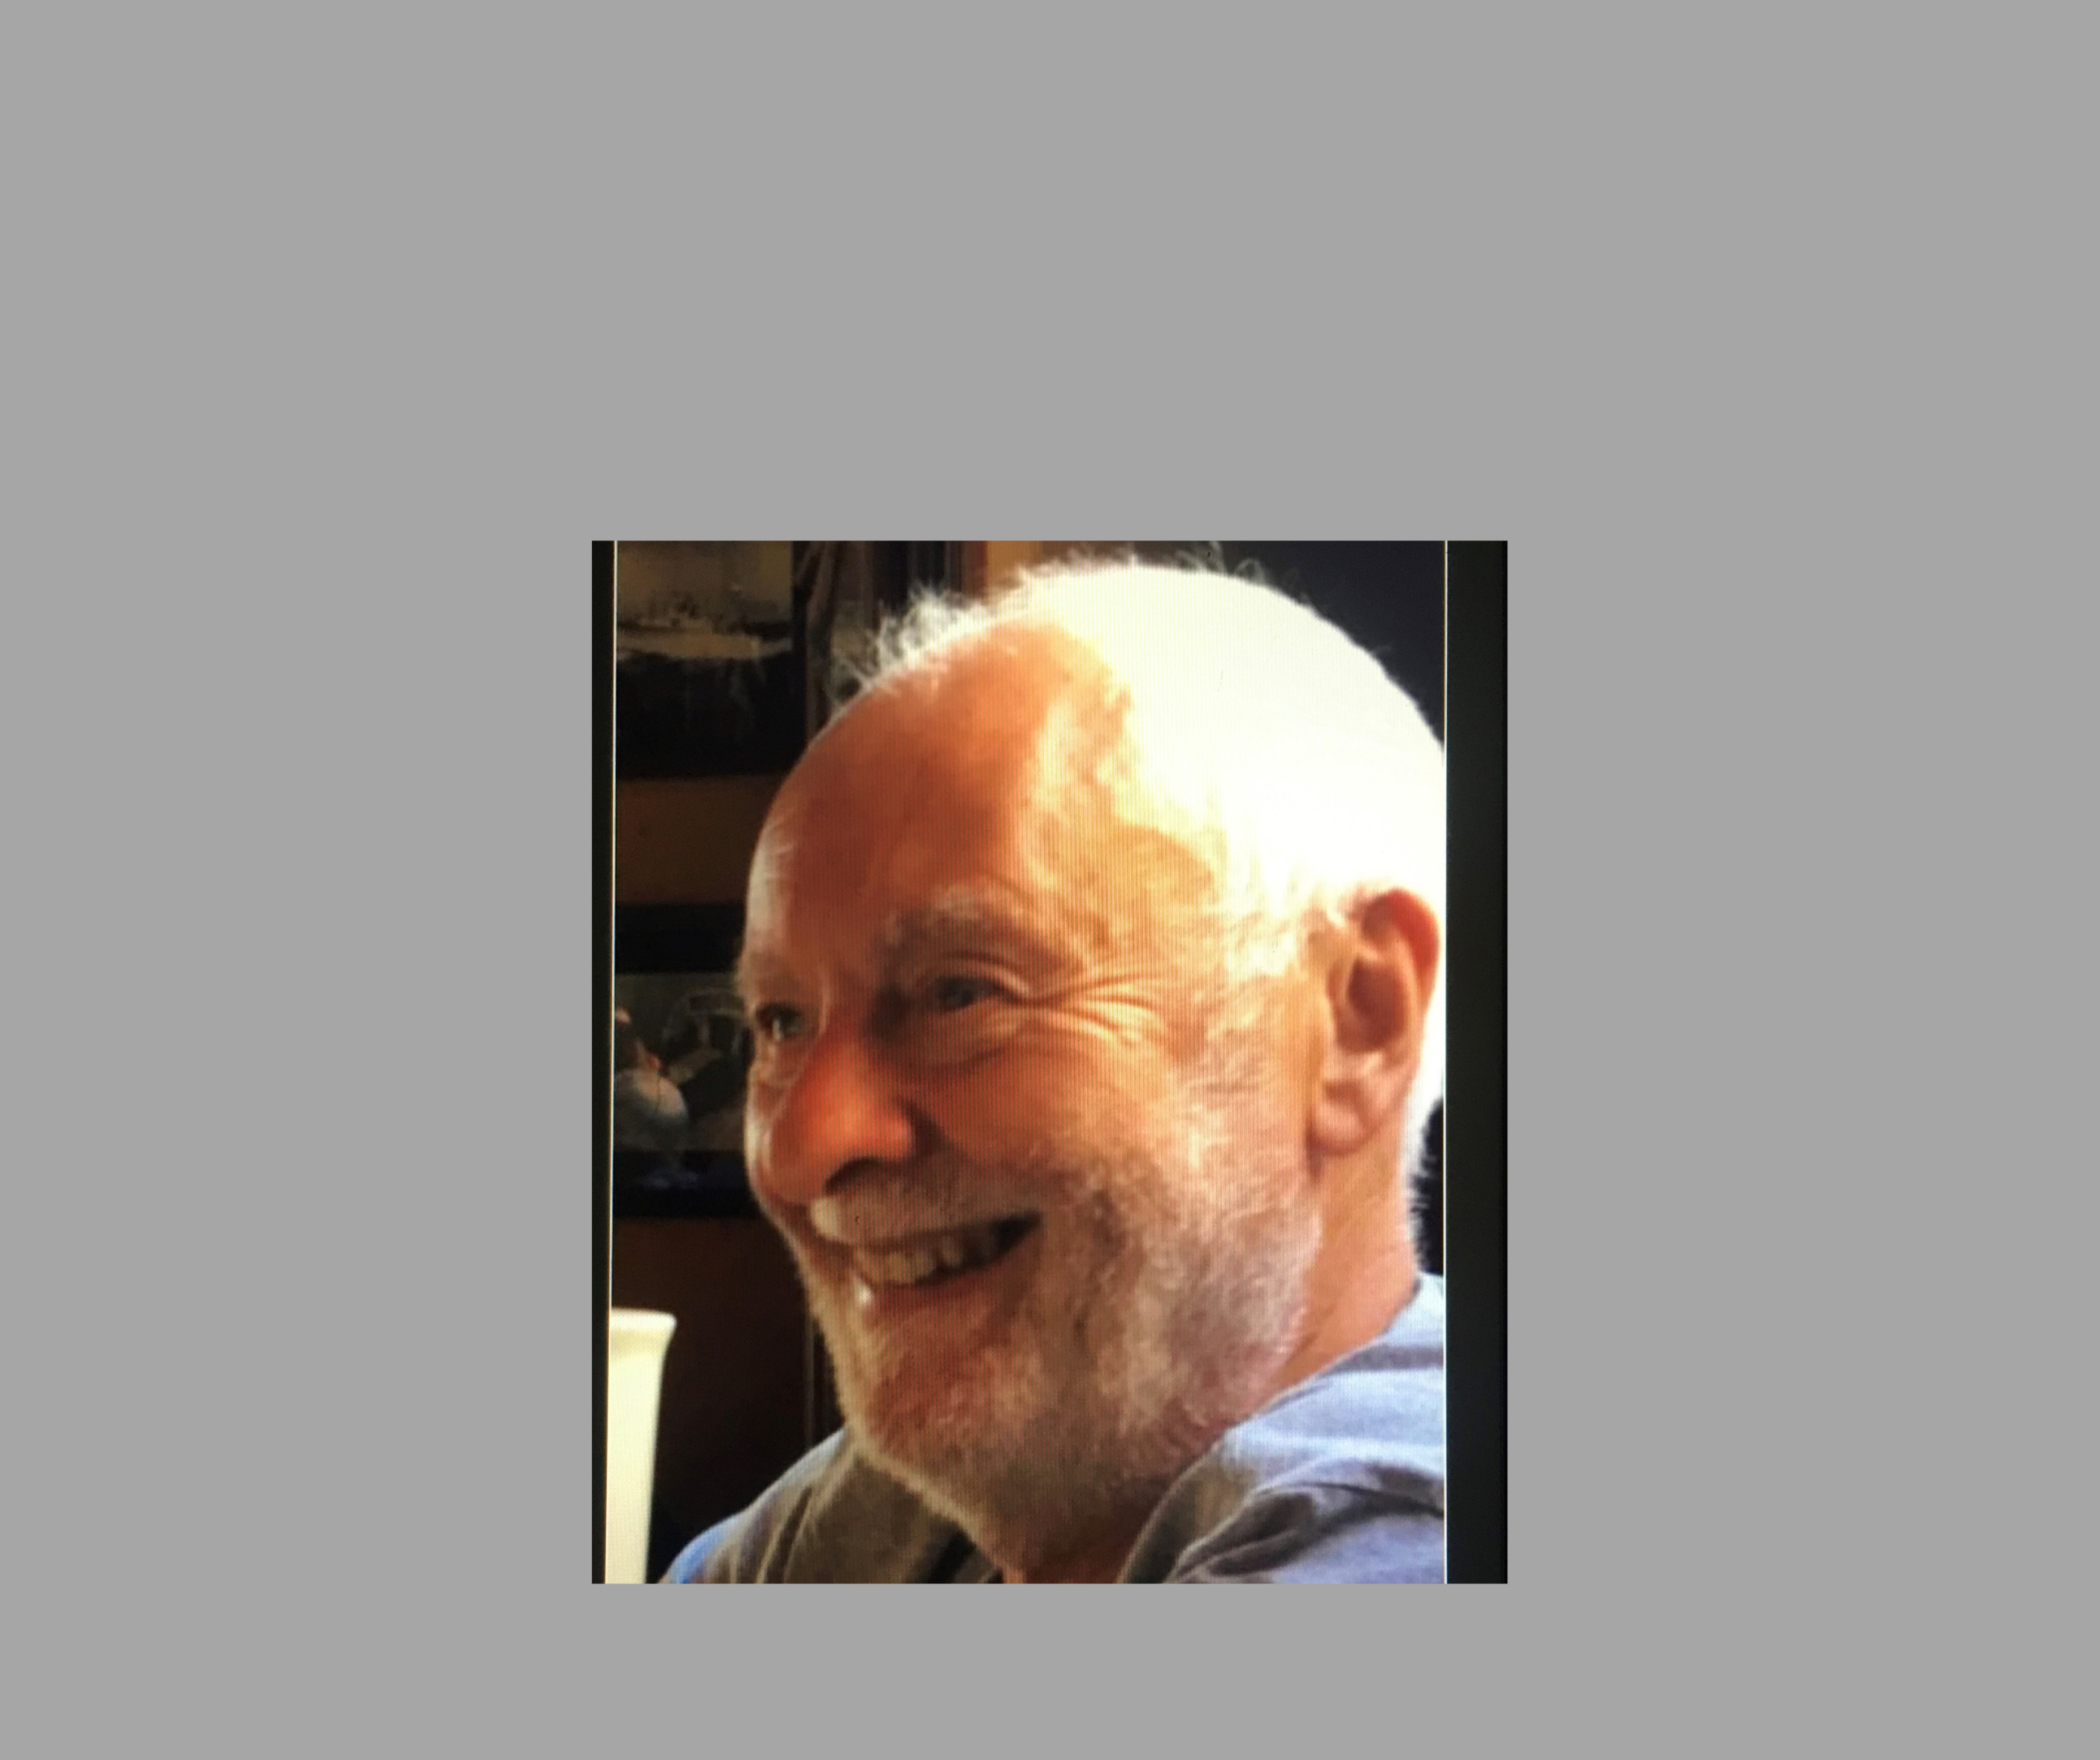 NEWS | Police confirm that 73-year-old Howard Bowen from Herefordshire remains missing and his family are increasingly concerned for his welfare